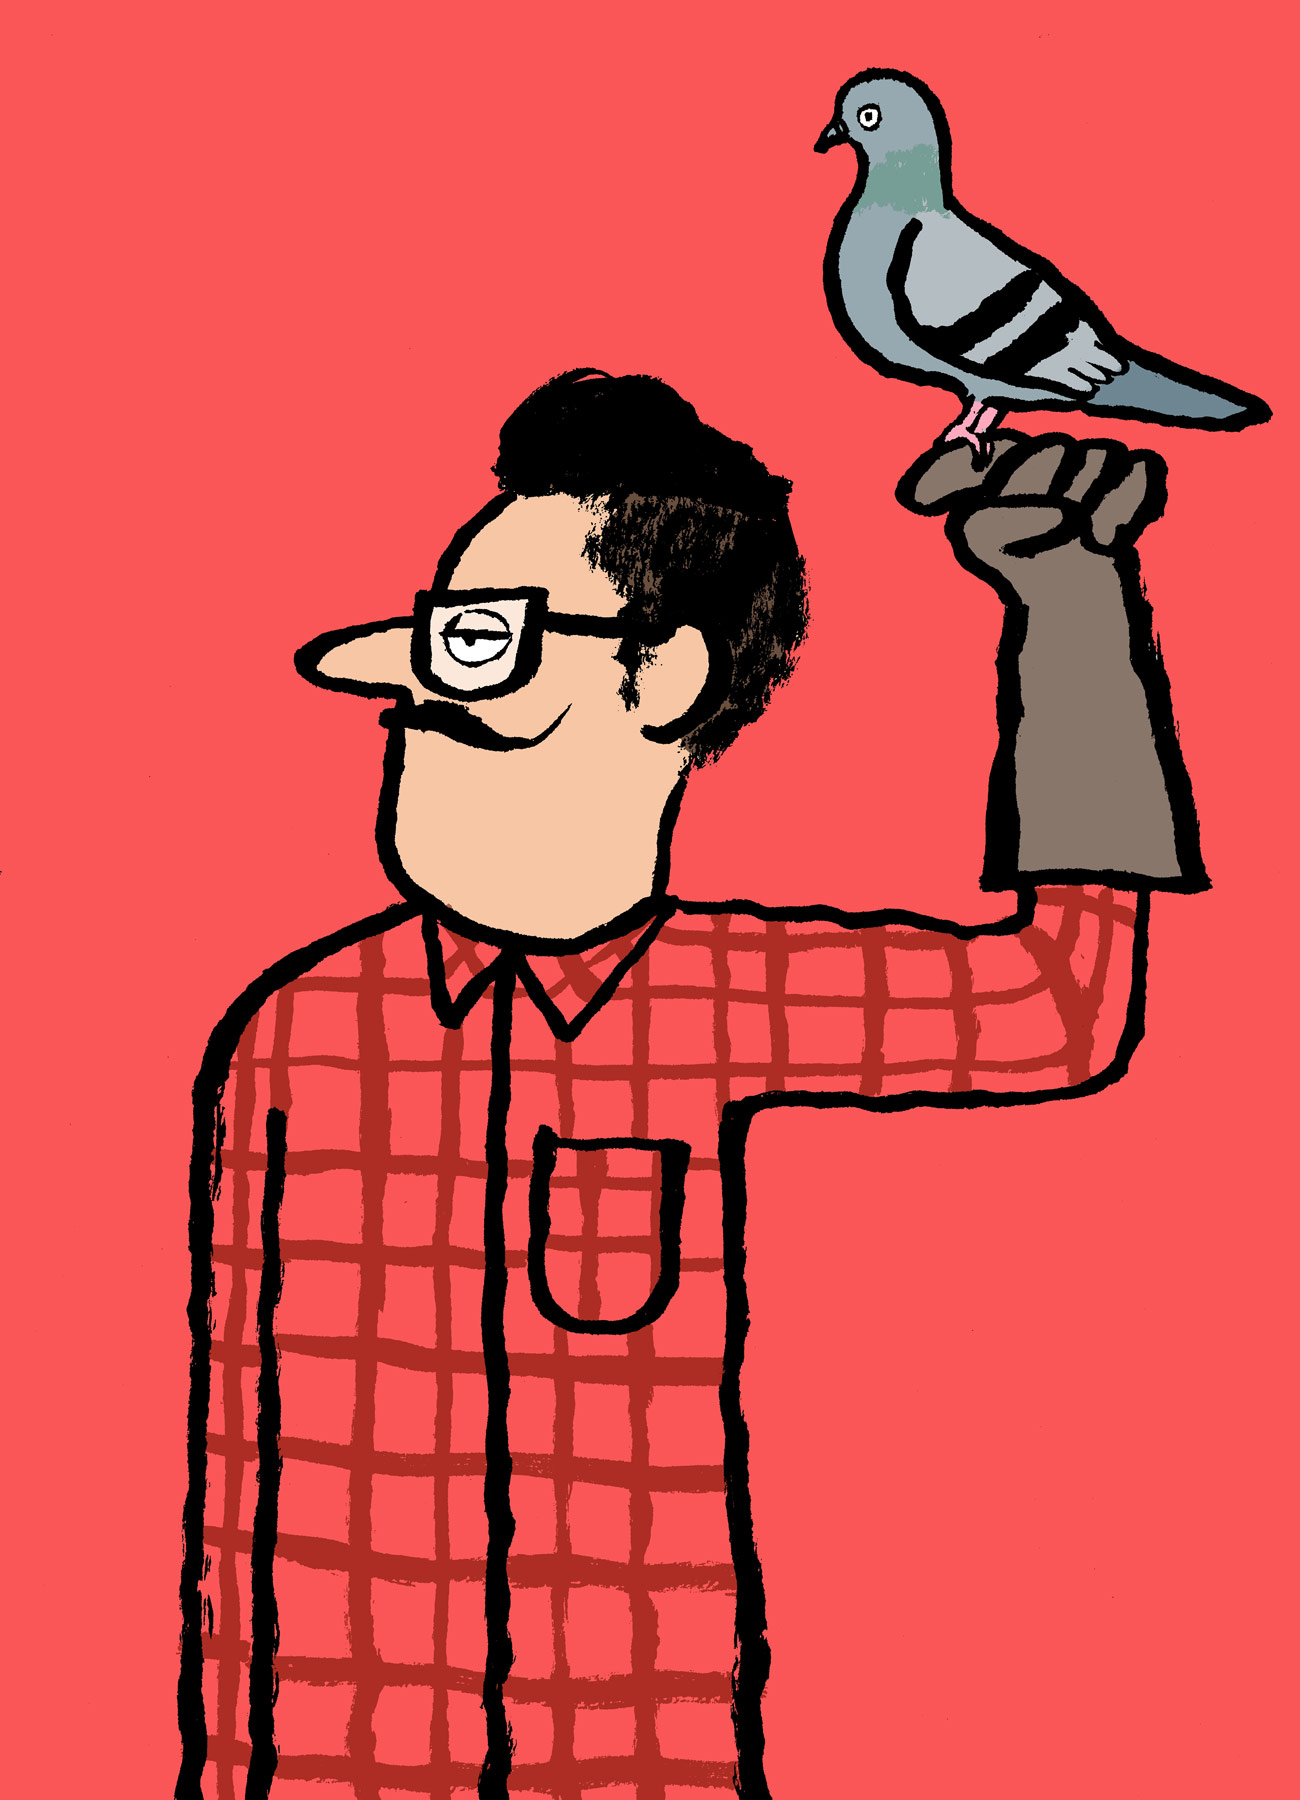 Modern Falconry: A man with a leather glove on and a pigeon on his finger